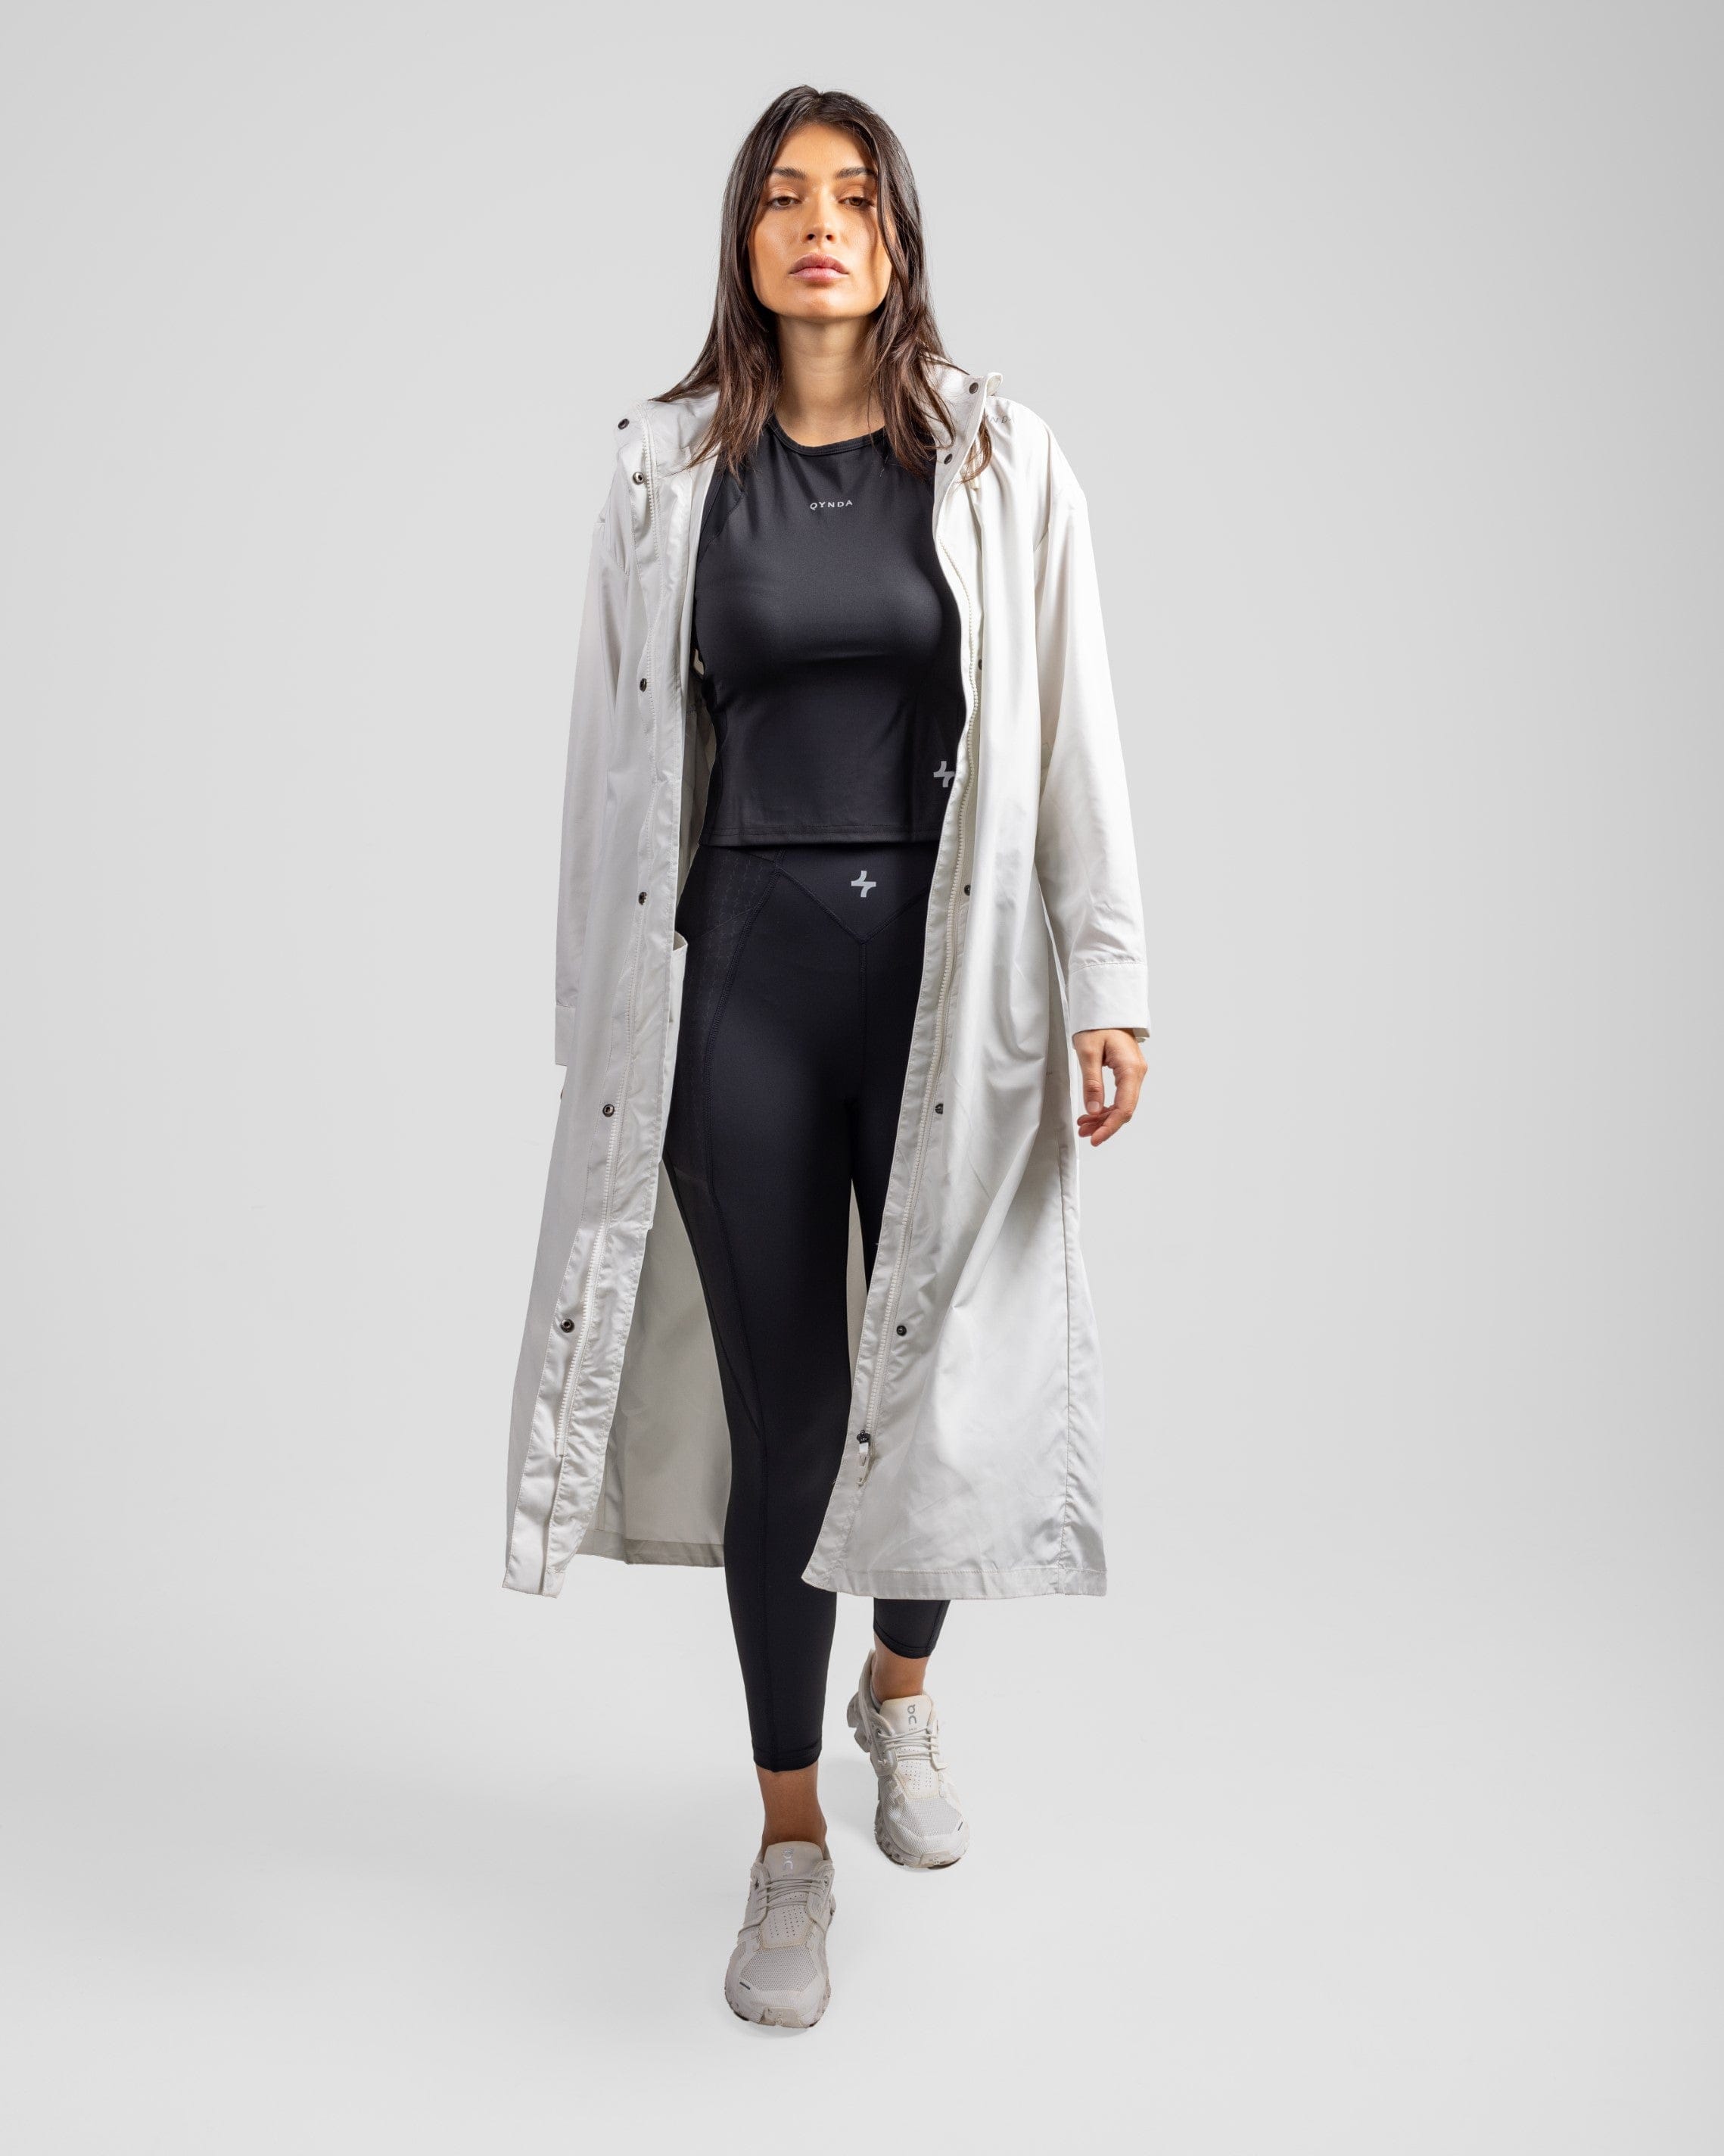 A model, wearing a modest Off White MAK LIGHT PARKA by Qynda, made of lightweight fabric and gray sneakers, set against a plain light background.